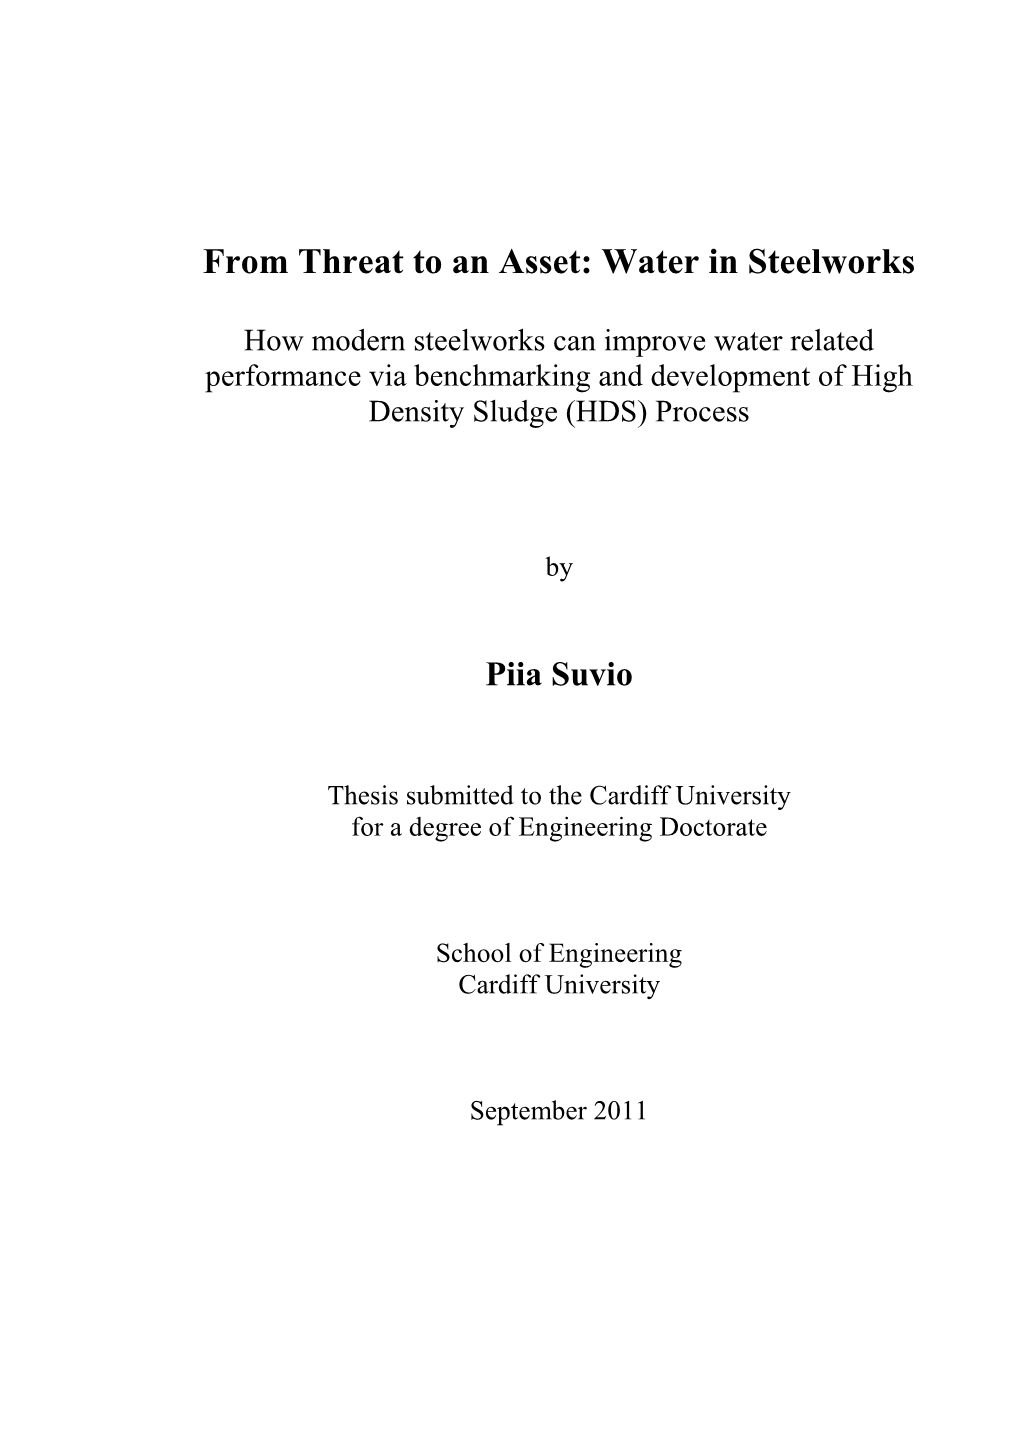 From Threat to an Asset: Water in Steelworks